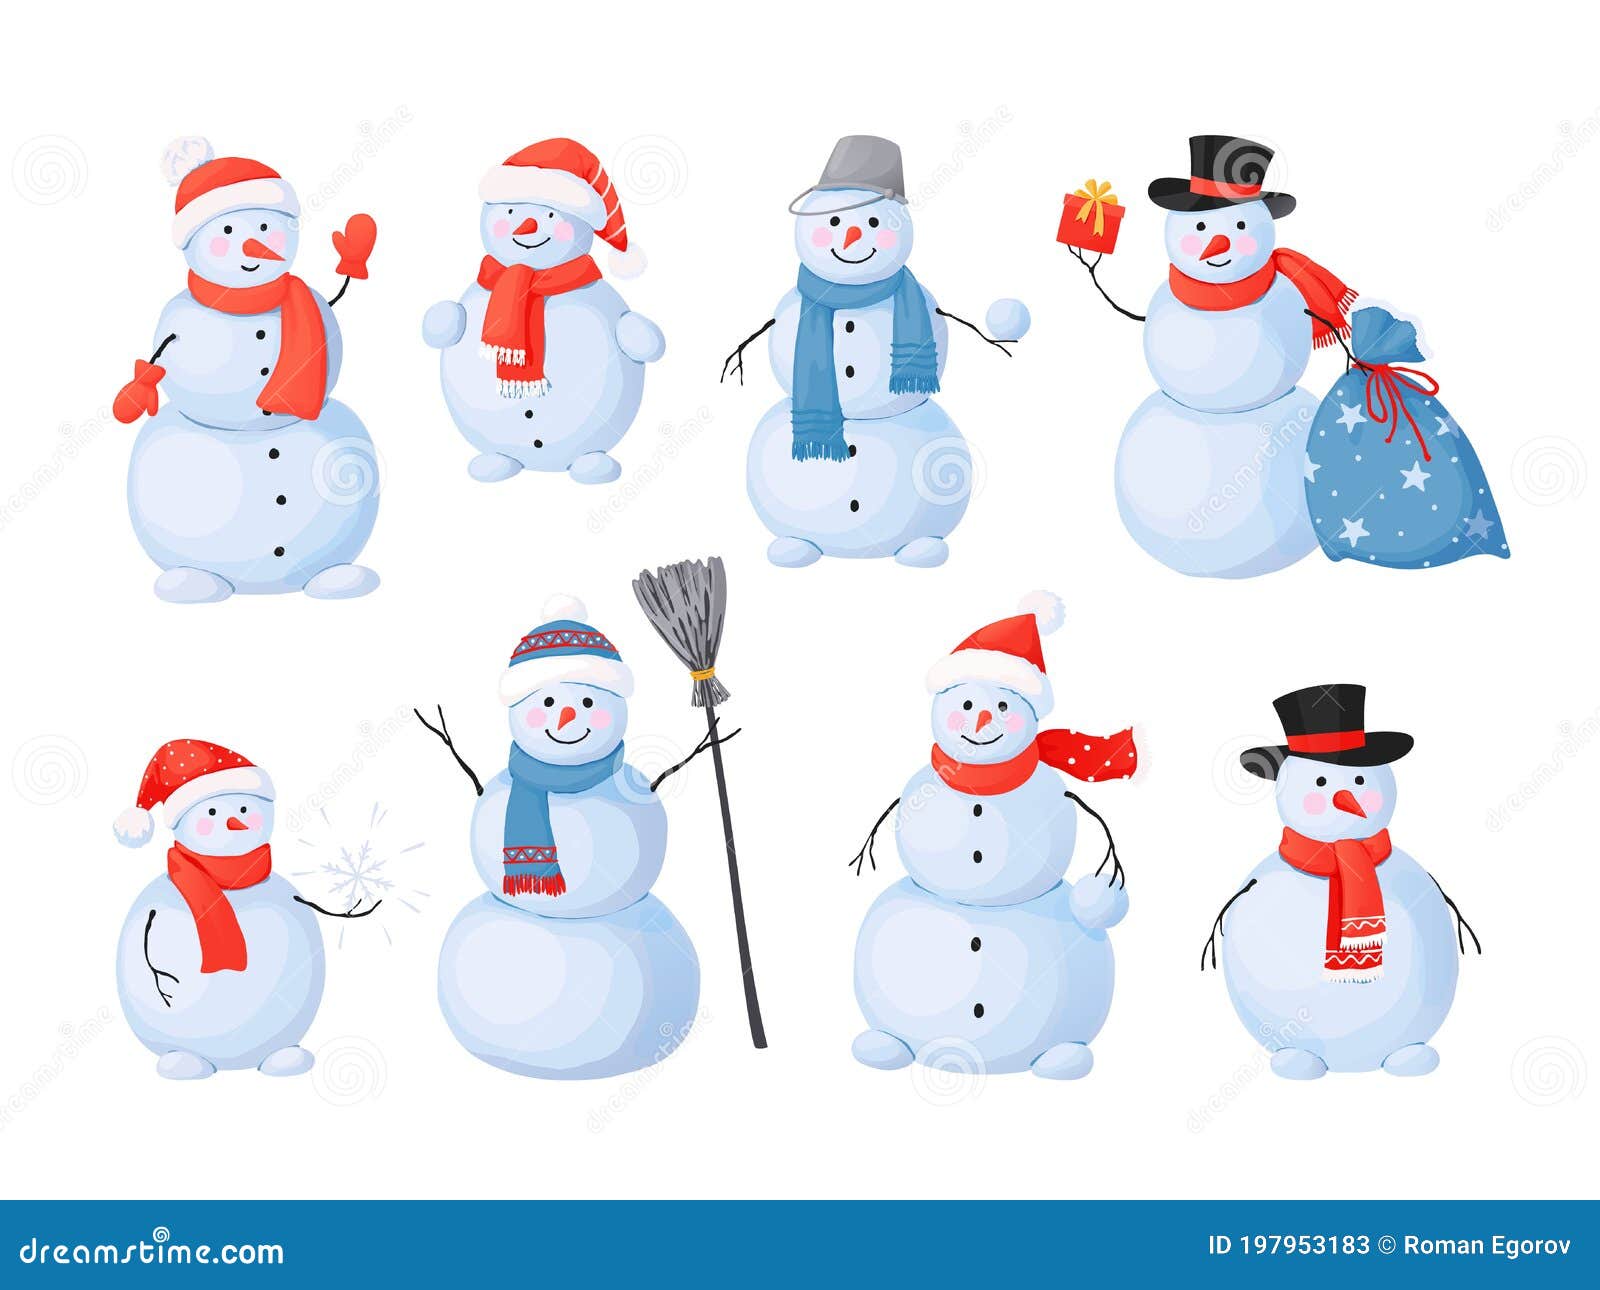 Snowman. Cartoon Christmas Characters with Happy Faces, Sculpture for Winter  Outdoor Activity. Snow and Ice Figure from Stock Vector - Illustration of  activity, game: 197953183